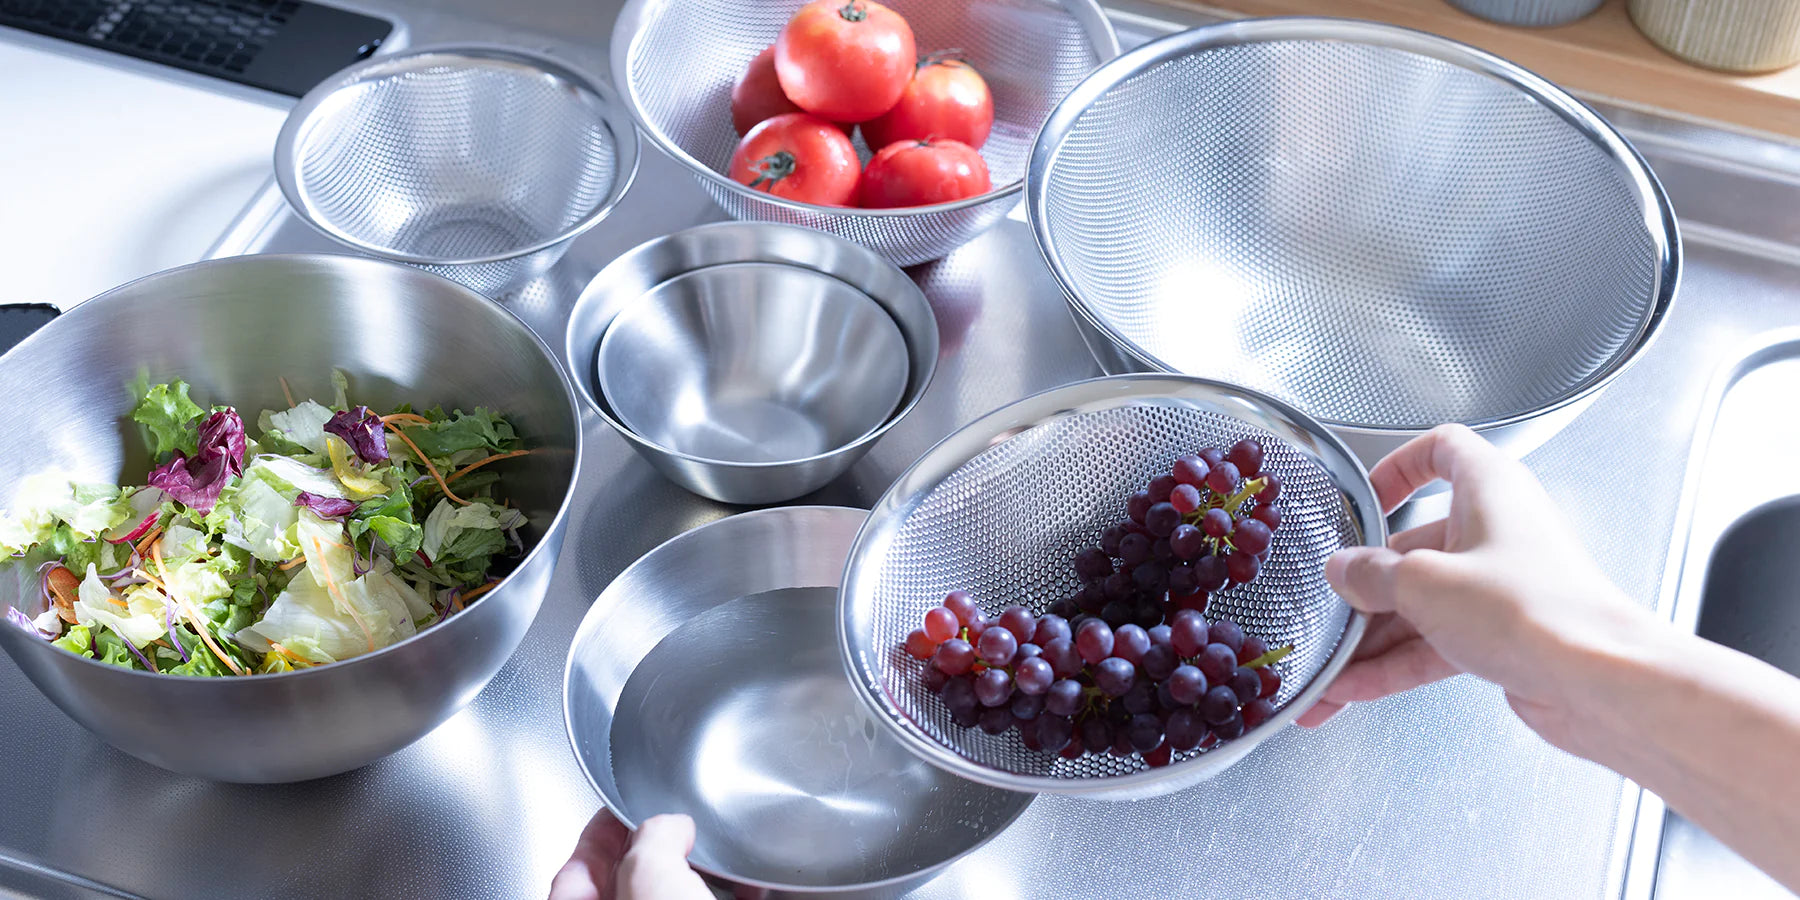 Discover our great selection of Colanders & Strainers at Globalkitchen Japan.